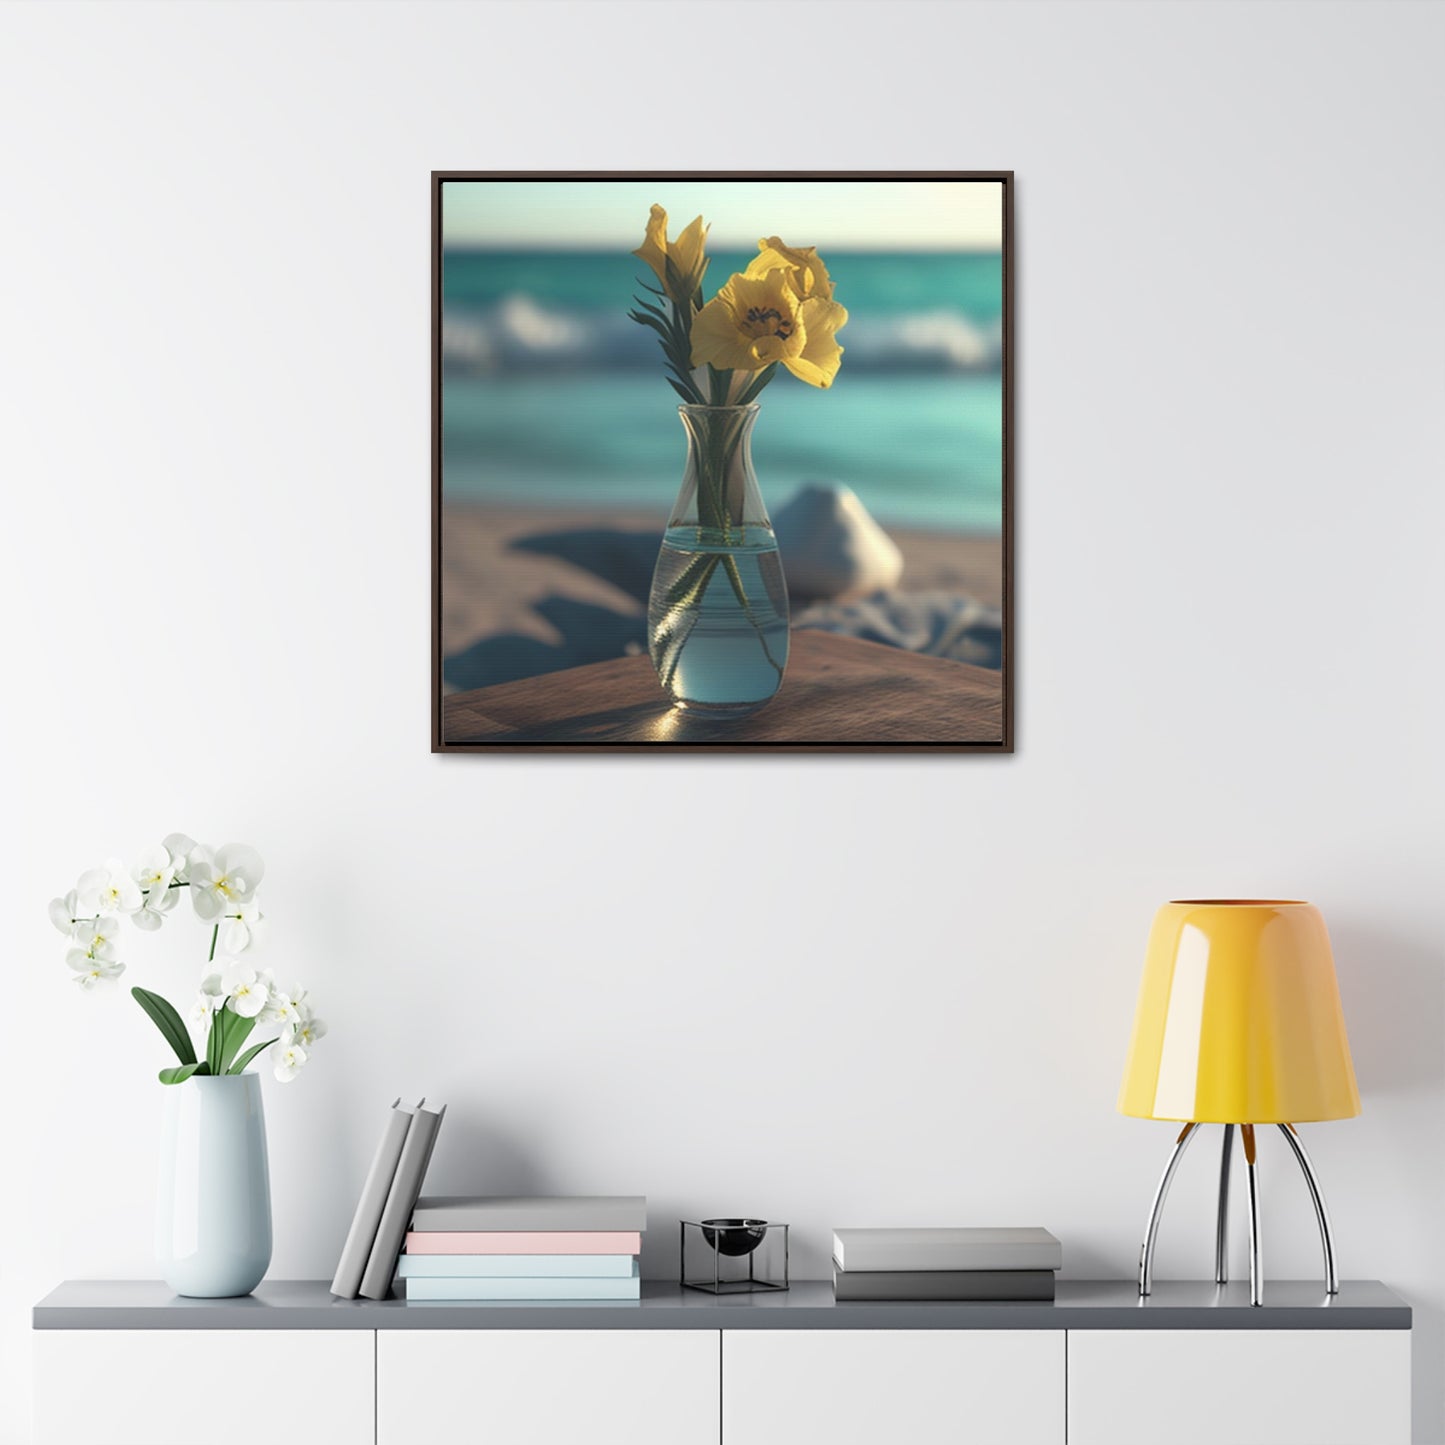 Gallery Canvas Wraps, Square Frame Yellow Gladiolus glass 4